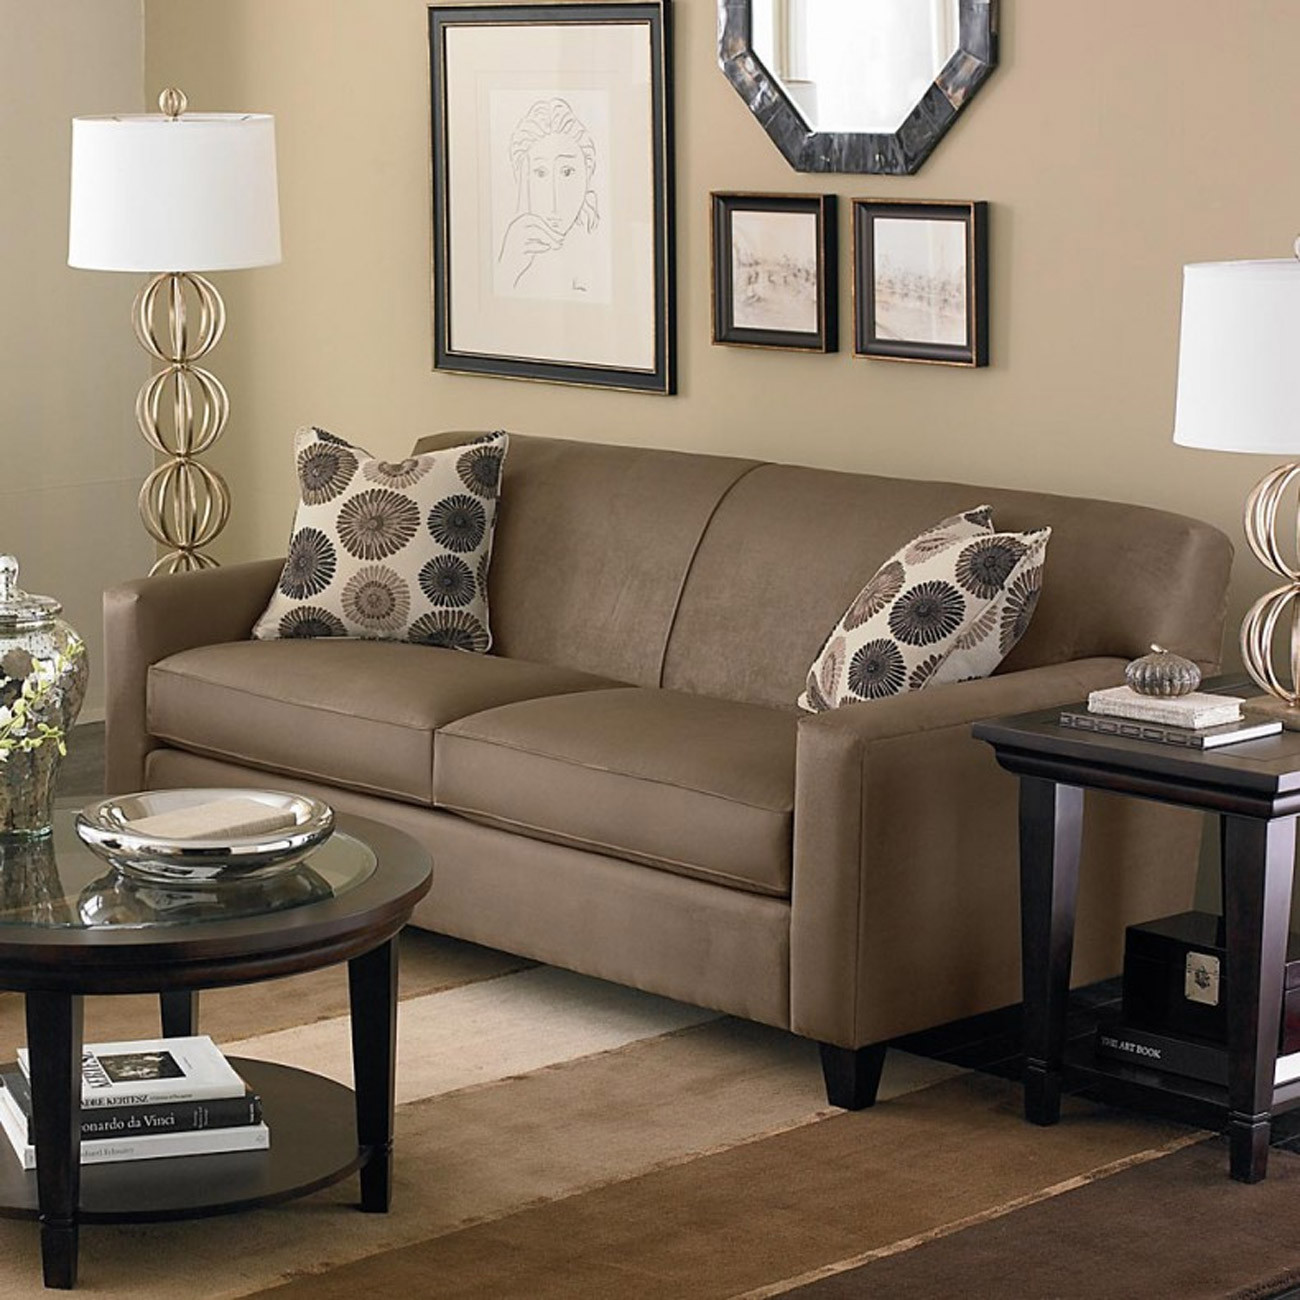 Small Living Room Furniture Ideas
 Find Suitable Living Room Furniture With Your Style